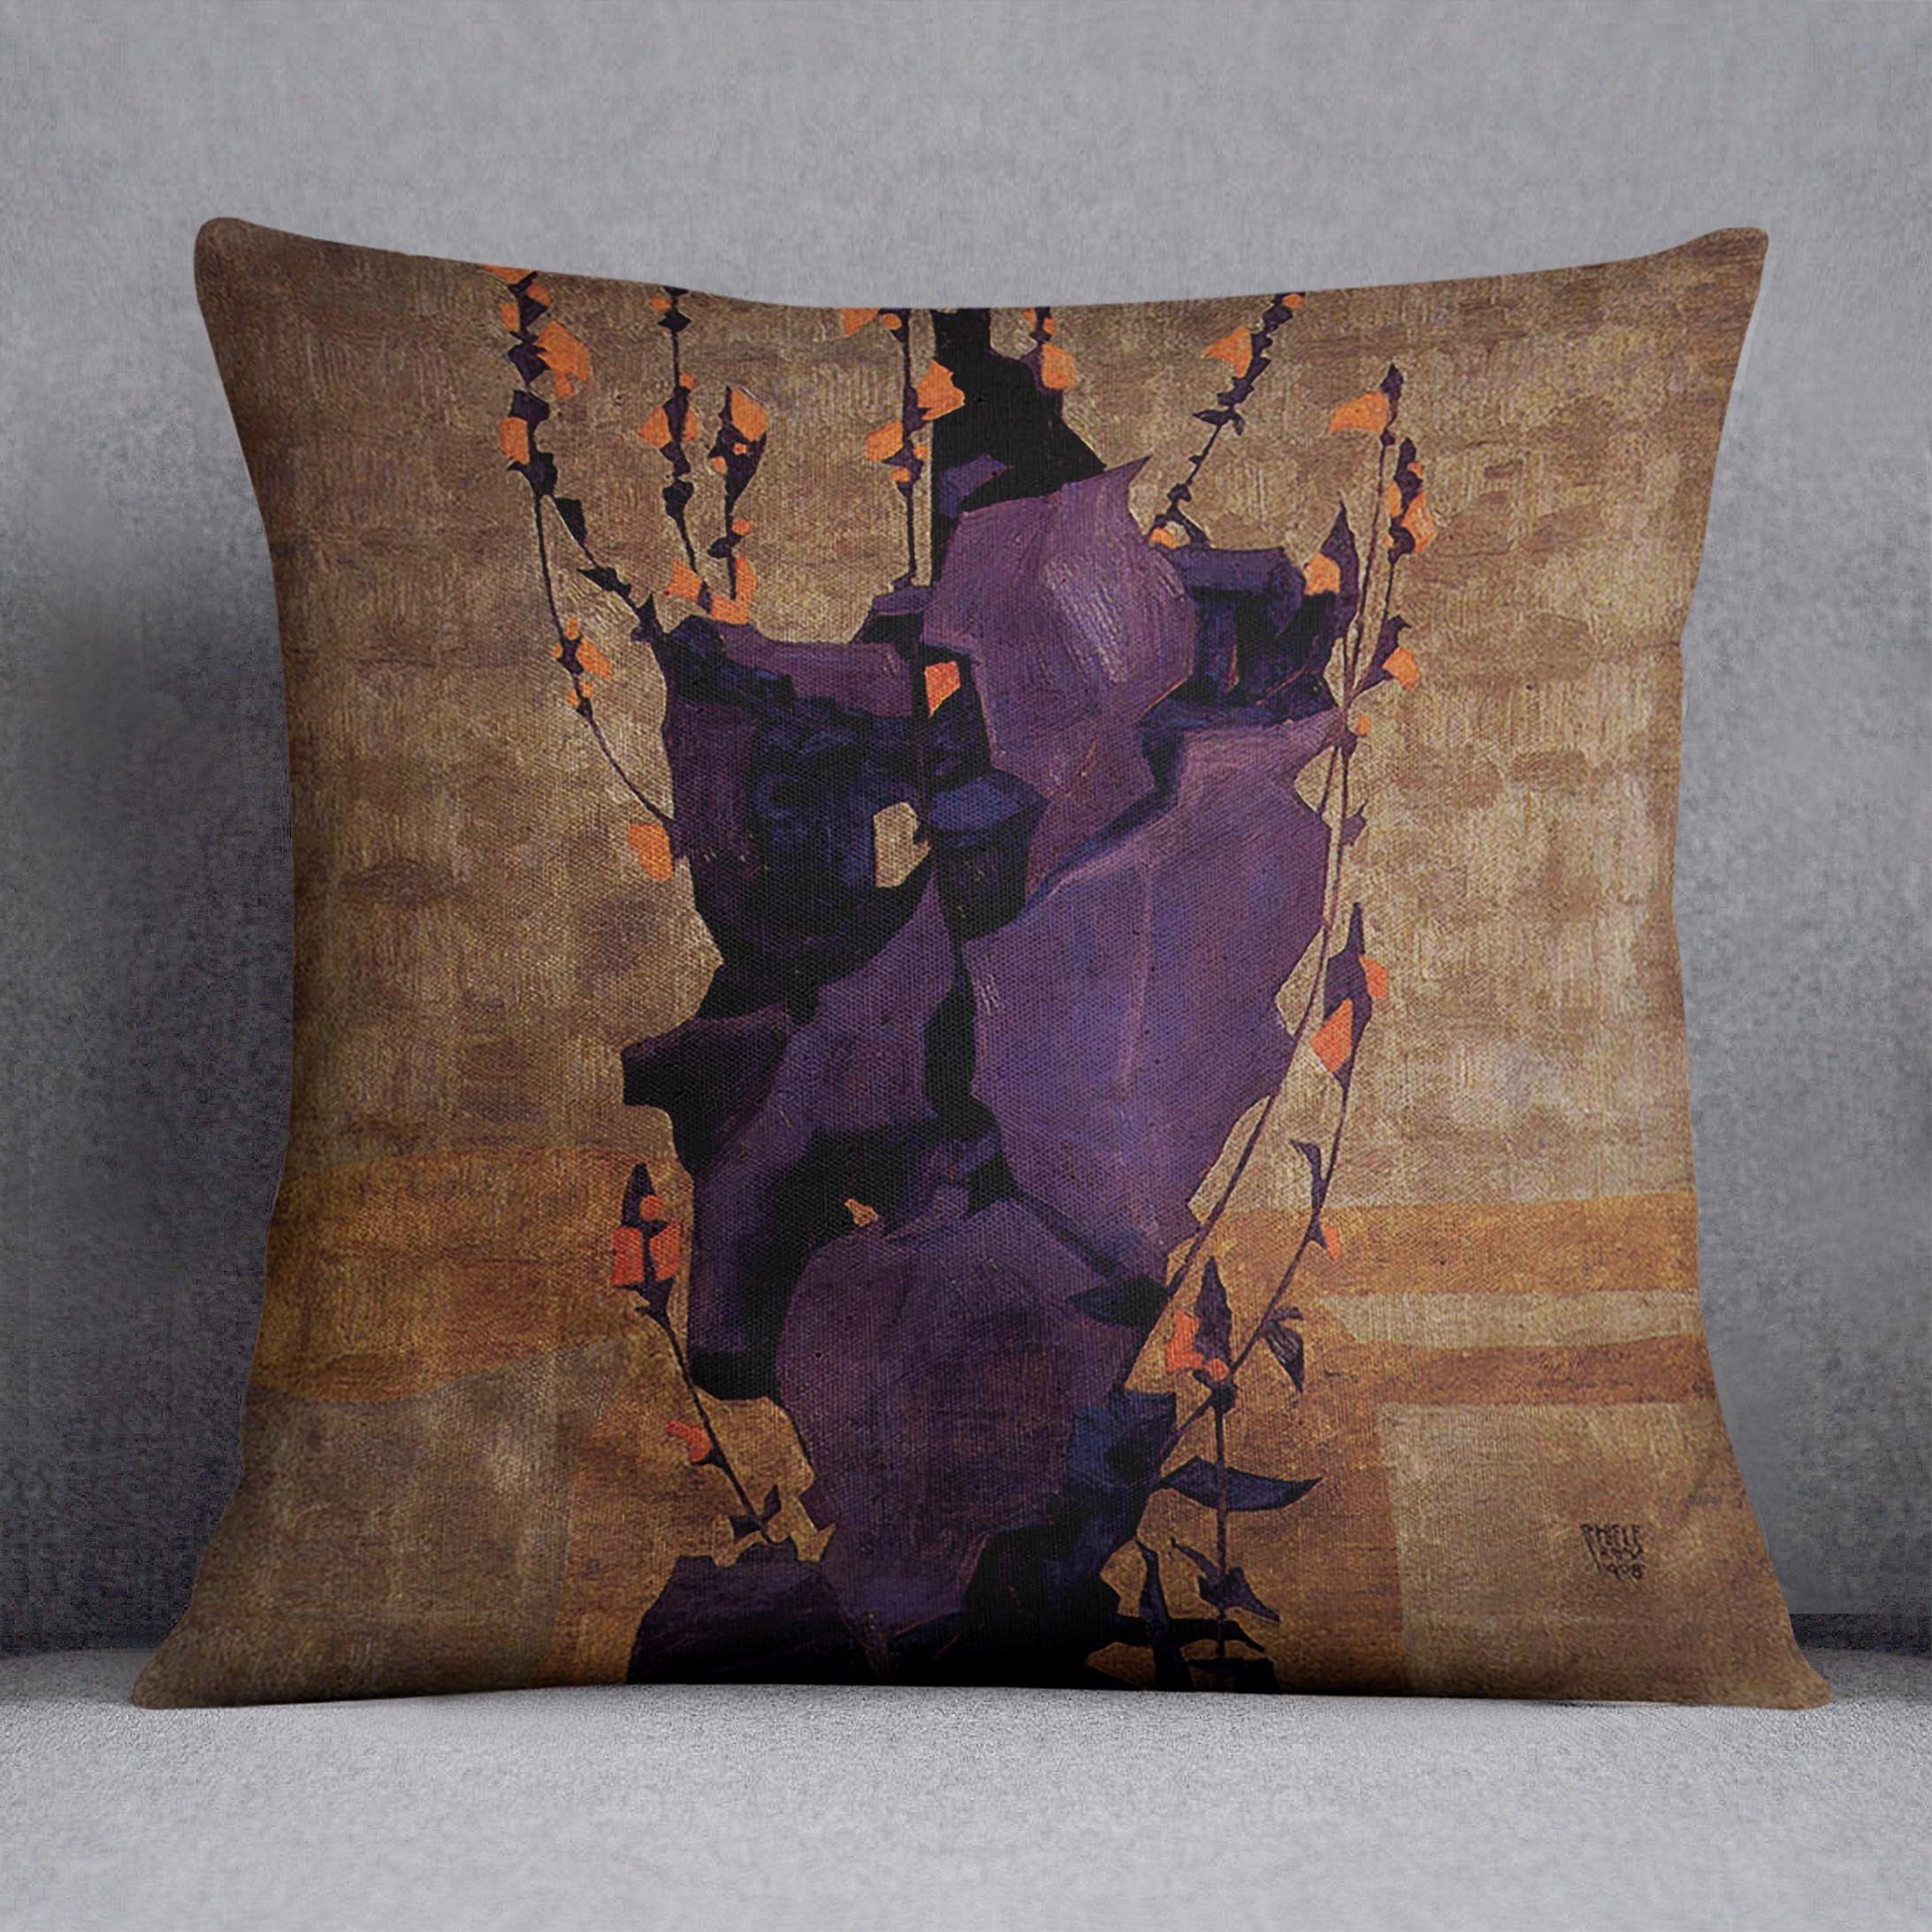 Stylized floral before decorative background style of life by Egon Schiele Cushion